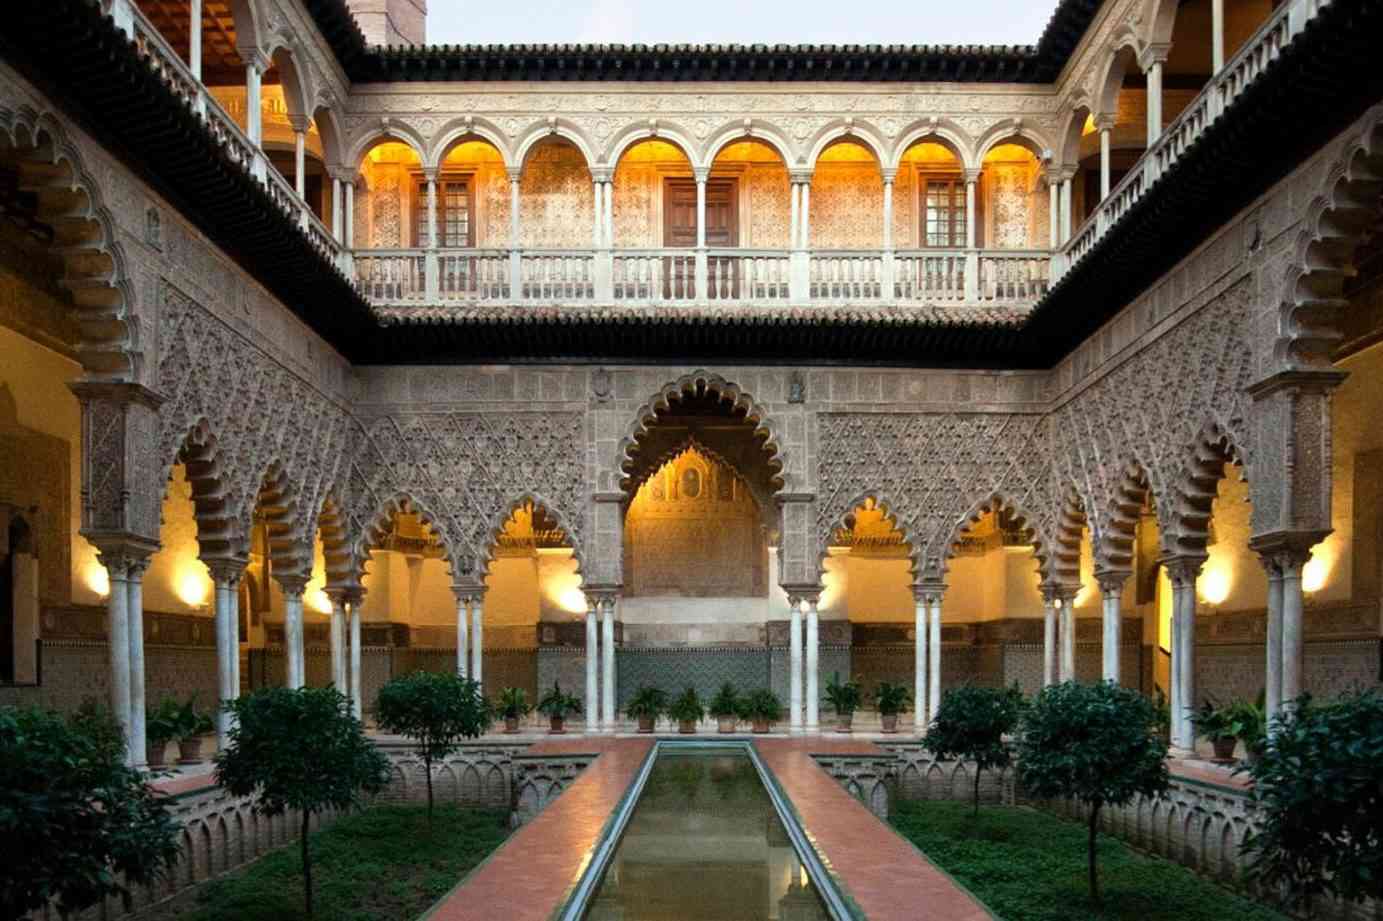 Real Alcazar Royal Palace and Gardens in Seville